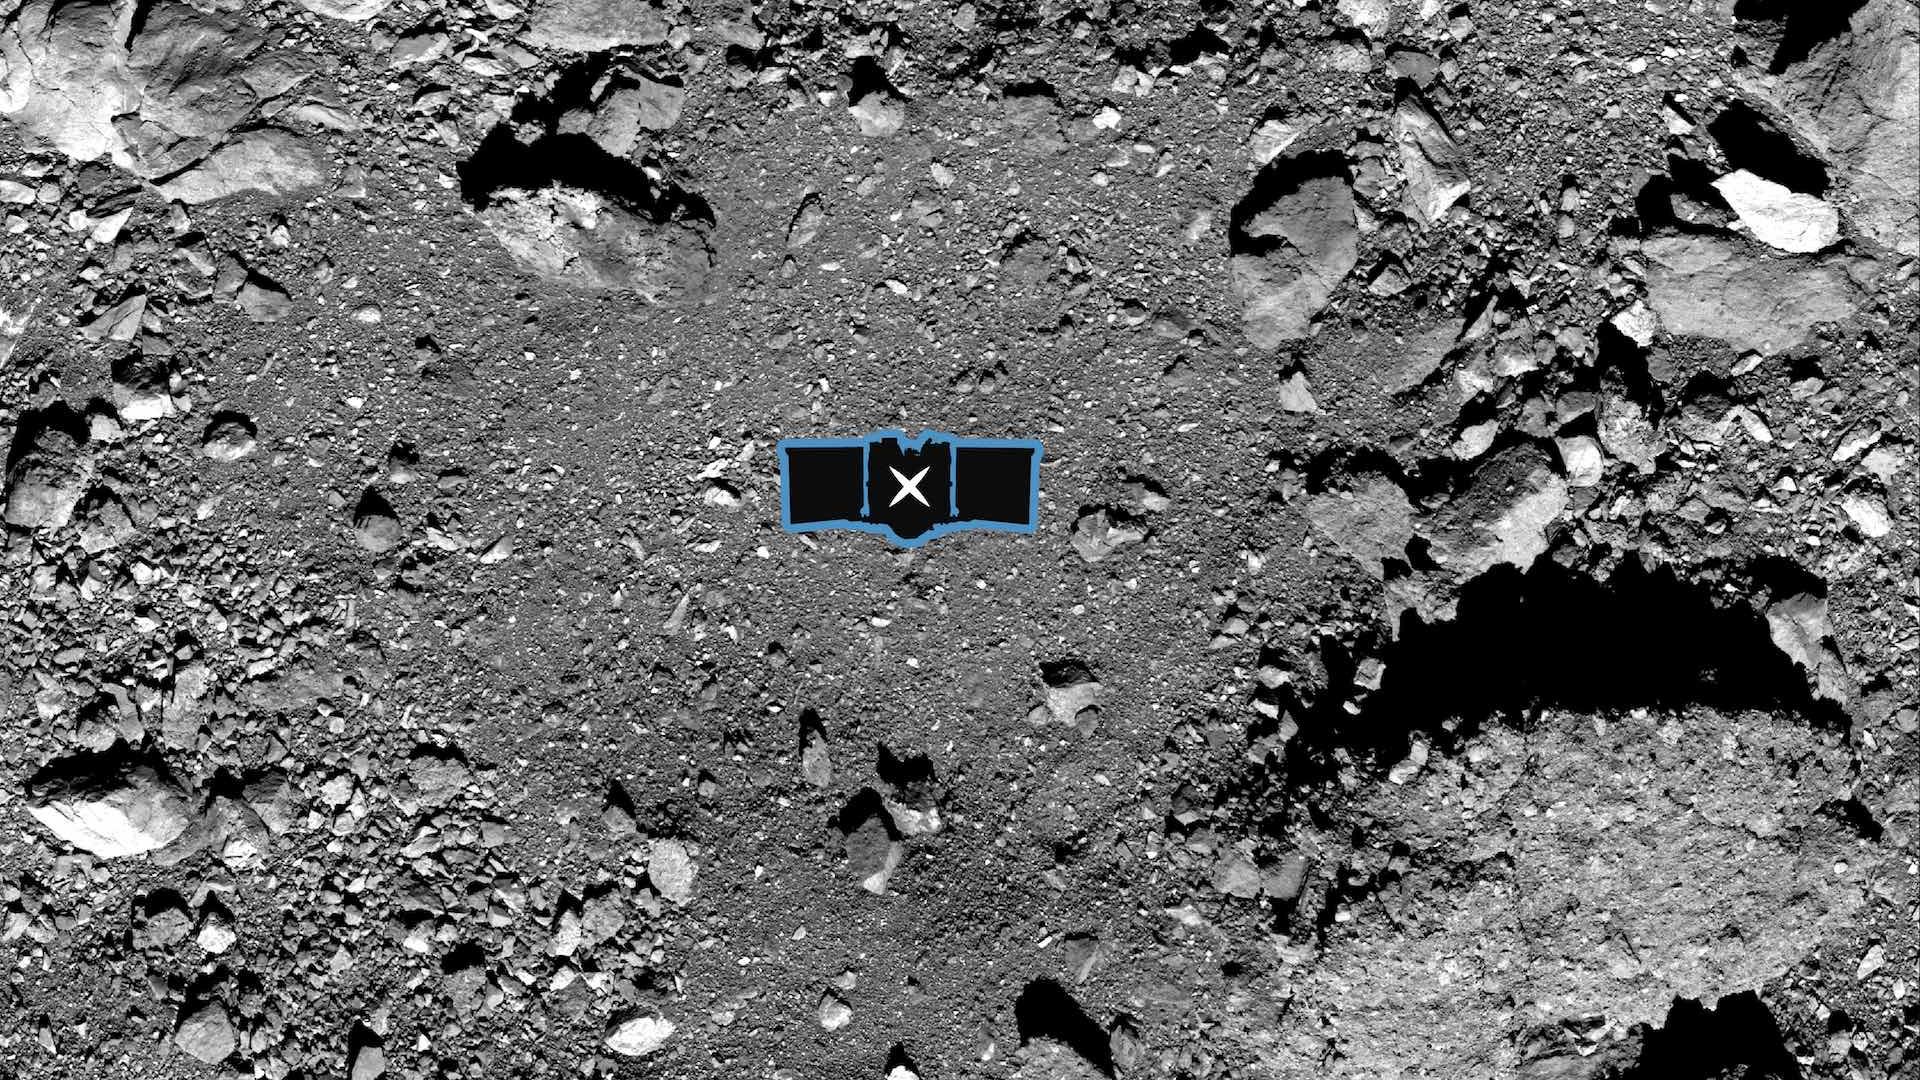 A black and white photo showing a rock-strewn landscape with a small outline of a spacecraft indicating a sample site point